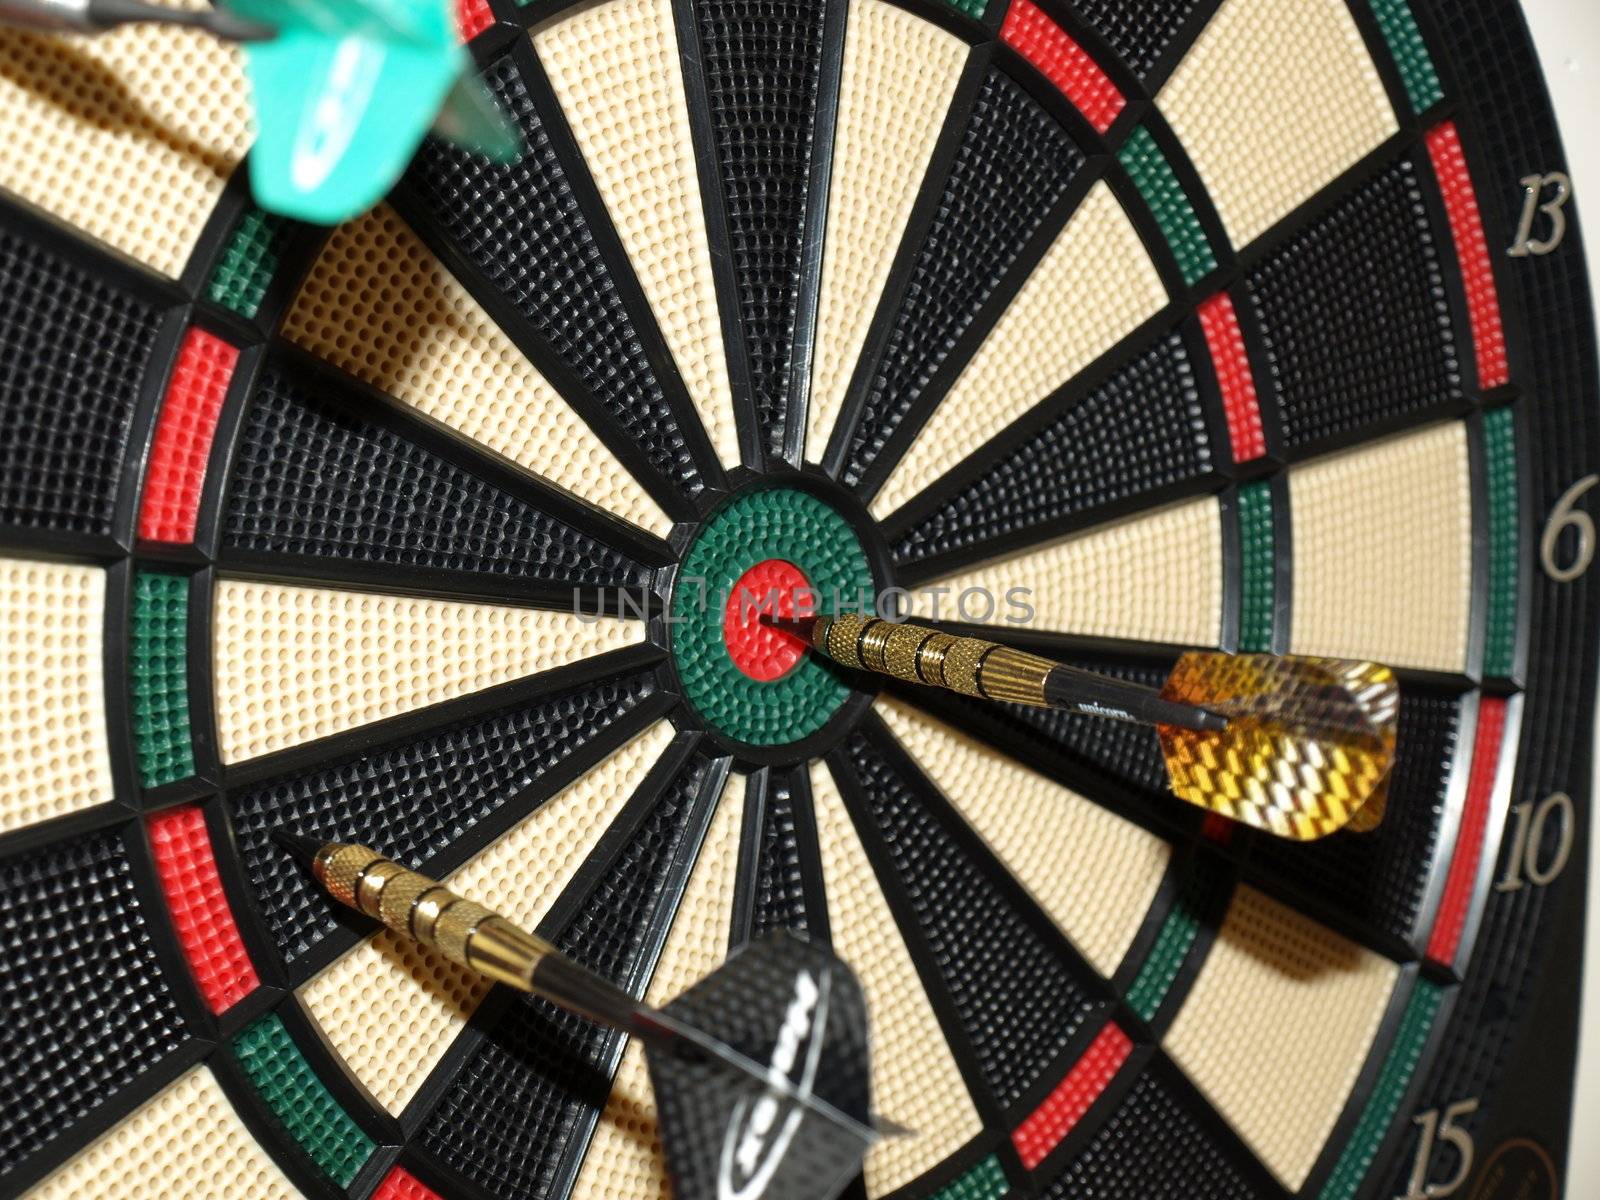 Darts thrown at the board with one bullseye